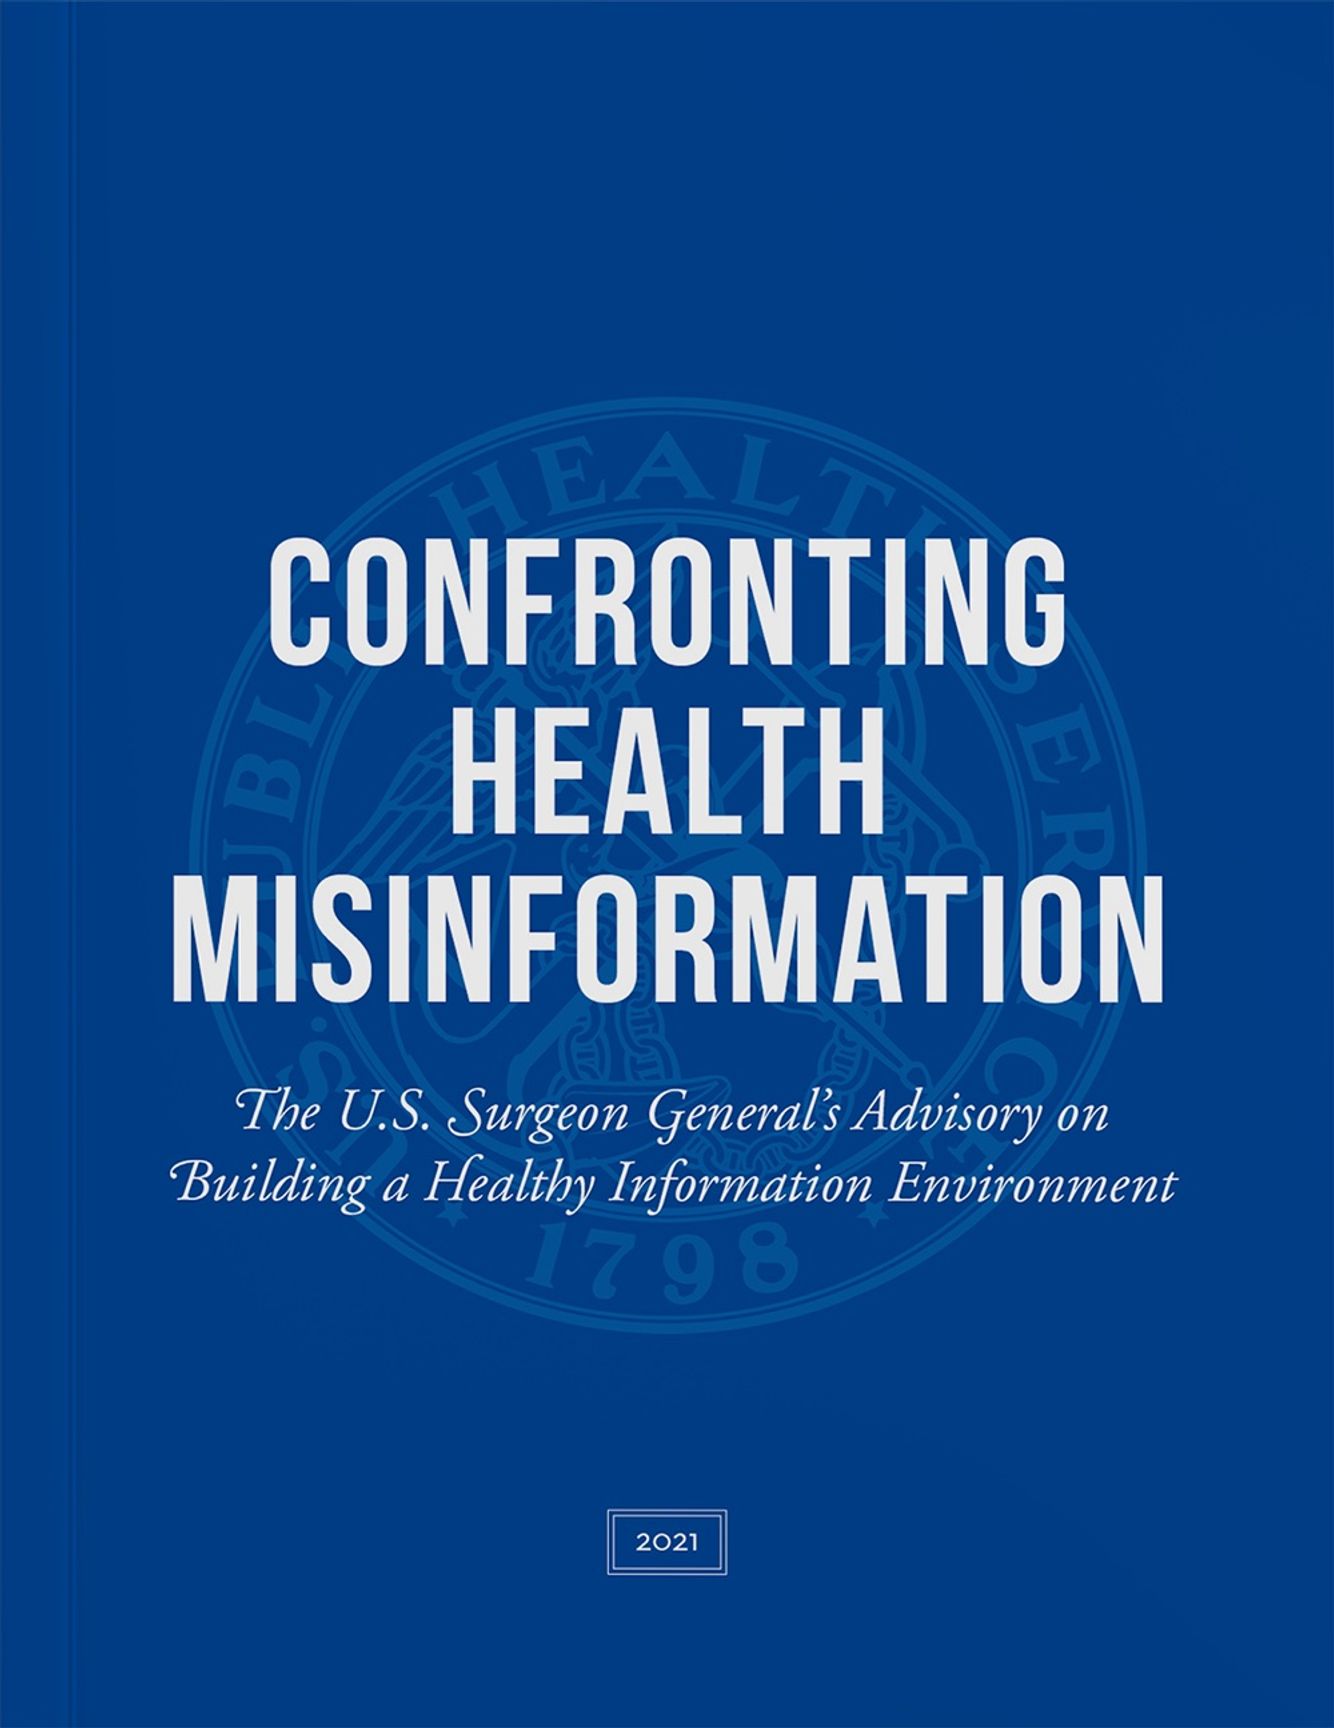 The Health Misinformation advisory cover sheet, titled Confronting Health Misinformation, The U.S. Surgeon General's Advisory on Building a Healthy Information Environment